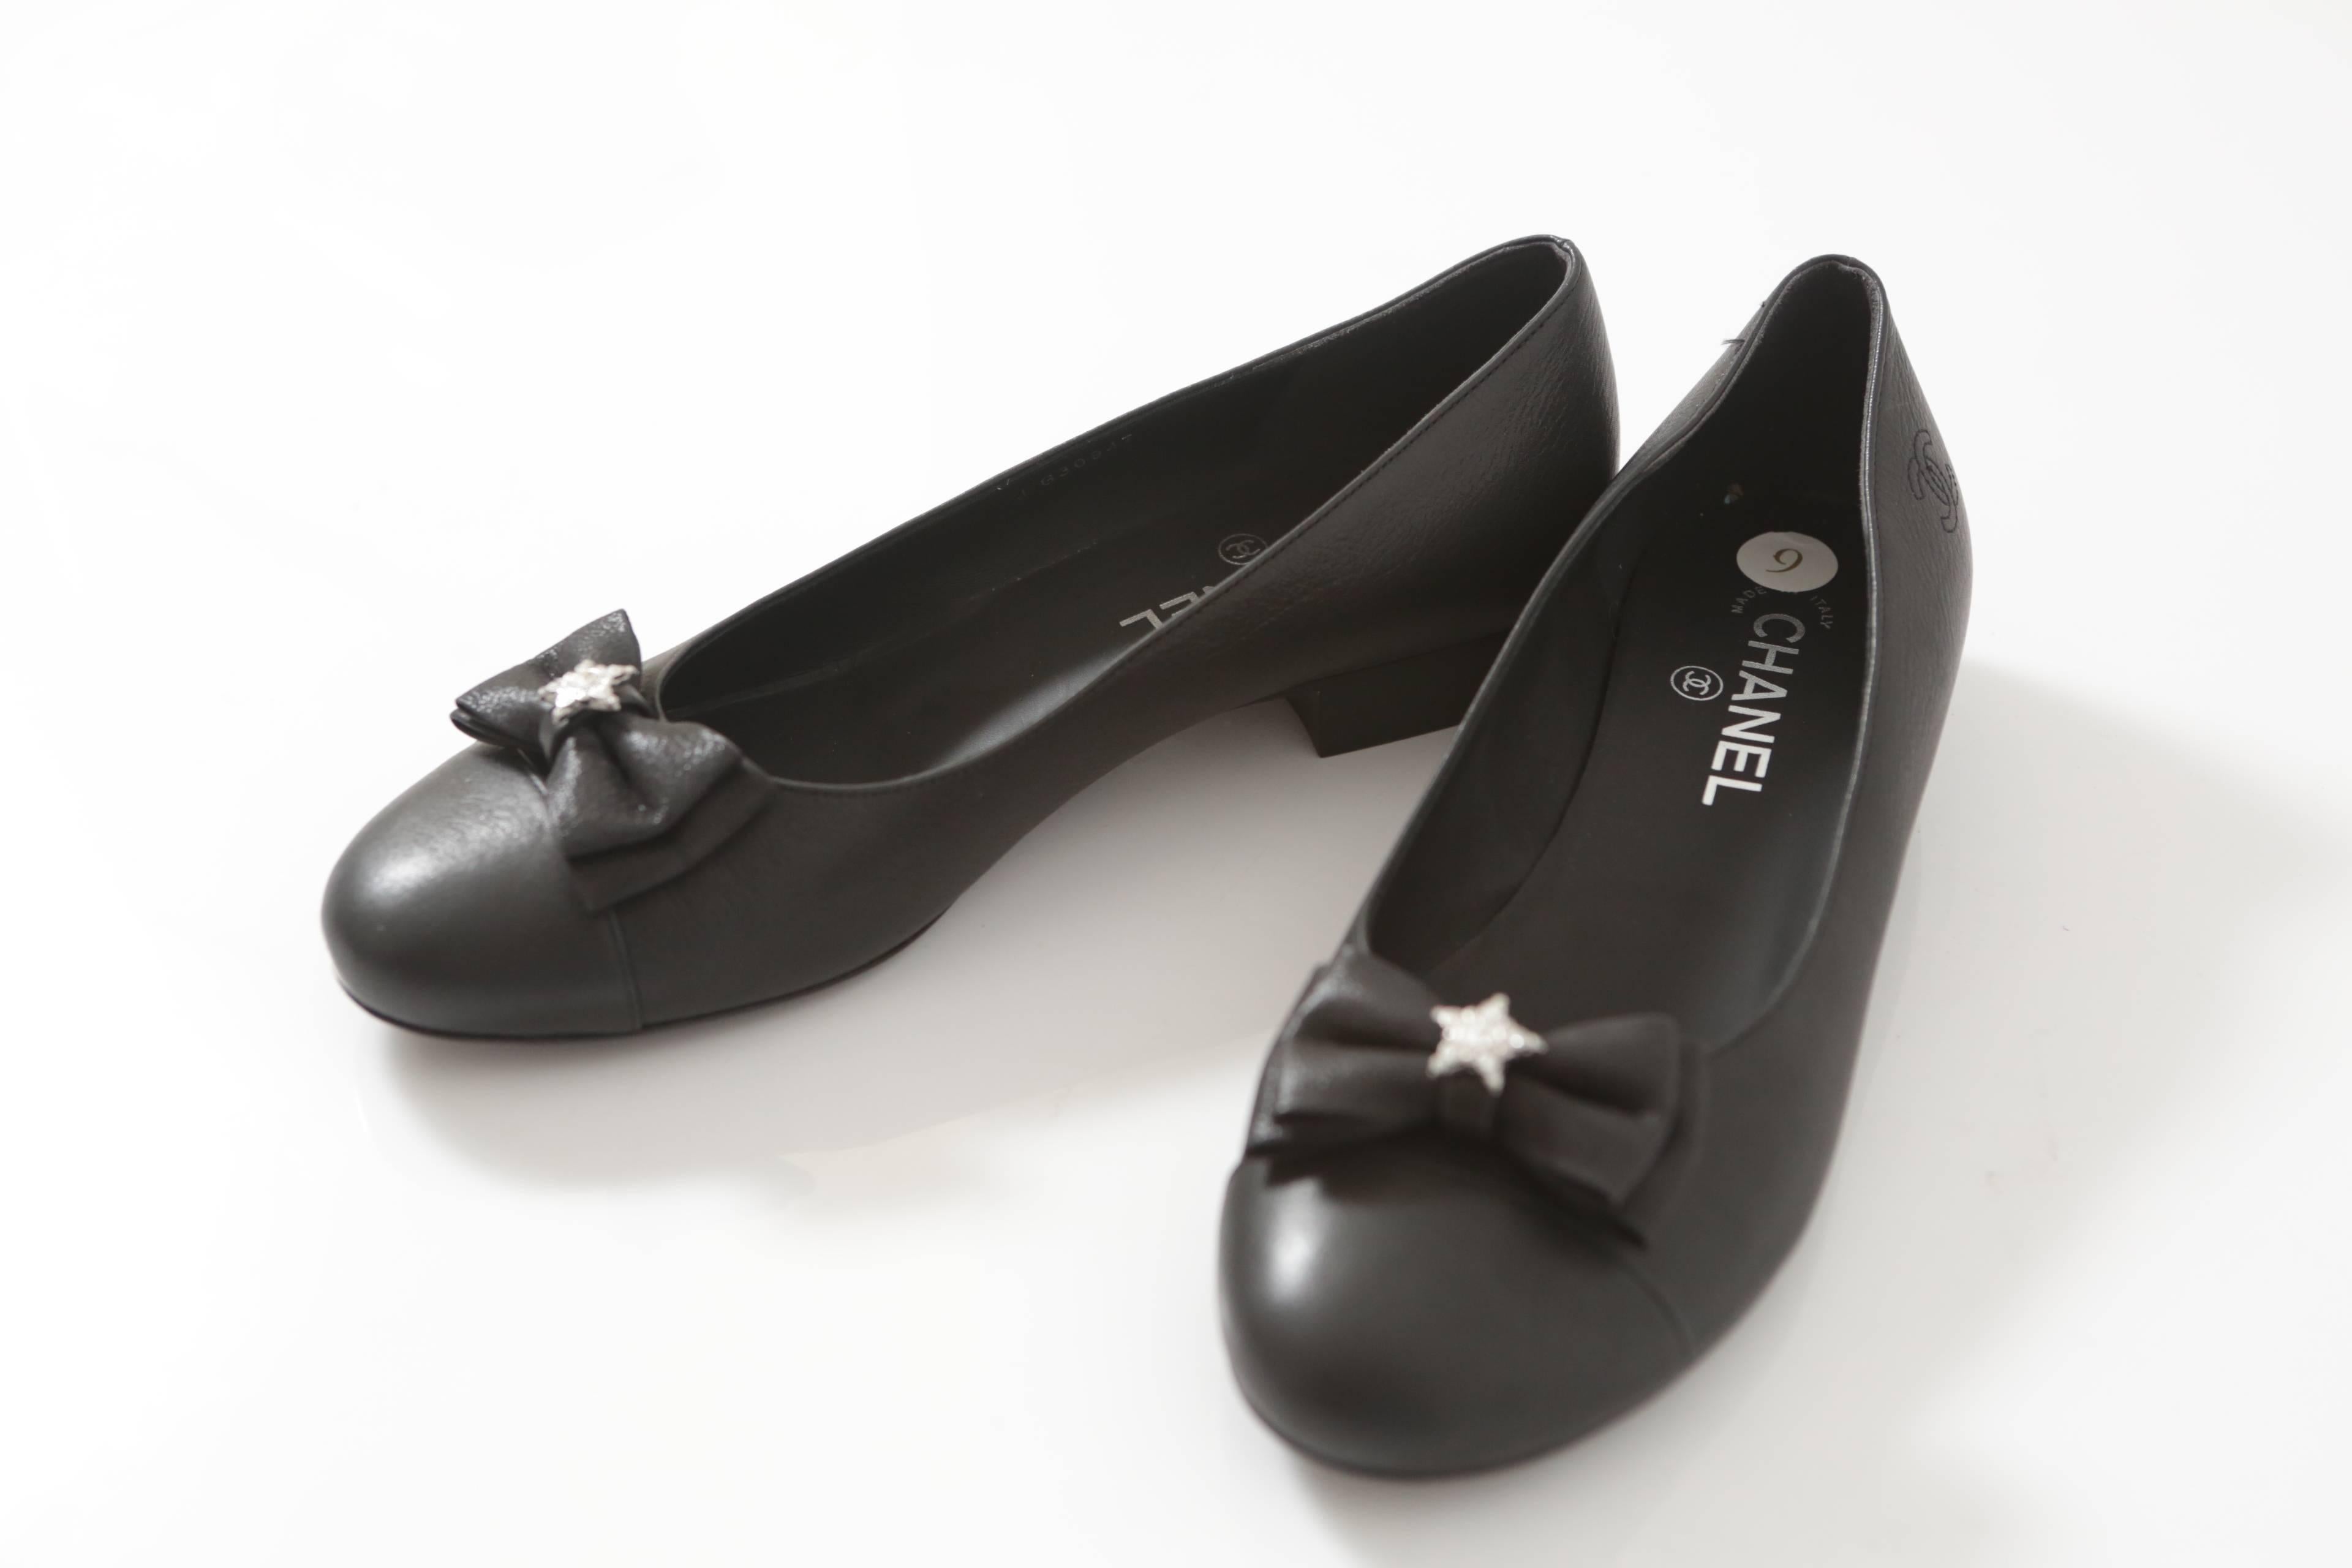 Chanel classic black leather flats with Grosgrain Bow & crystal star.  Comes with original box.